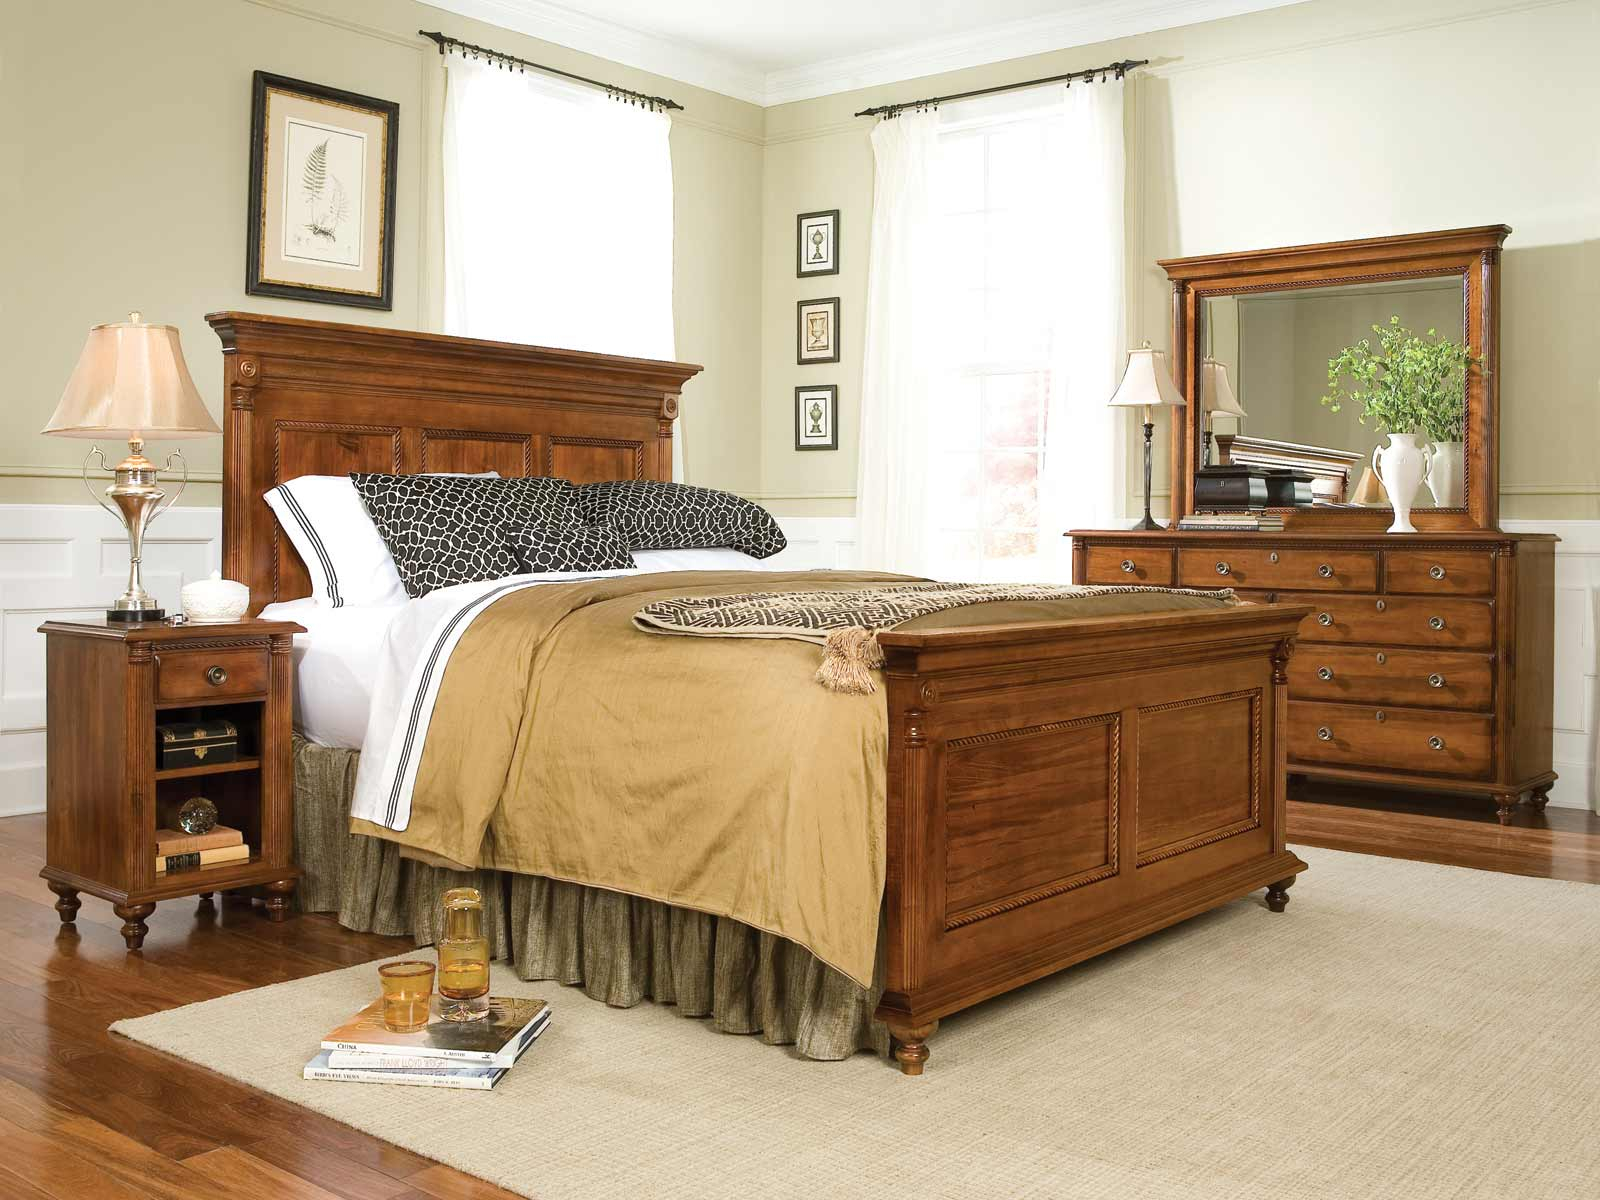 Durham Furniture Savile Row Panel Bedroom Set In Park Lane within dimensions 1600 X 1200